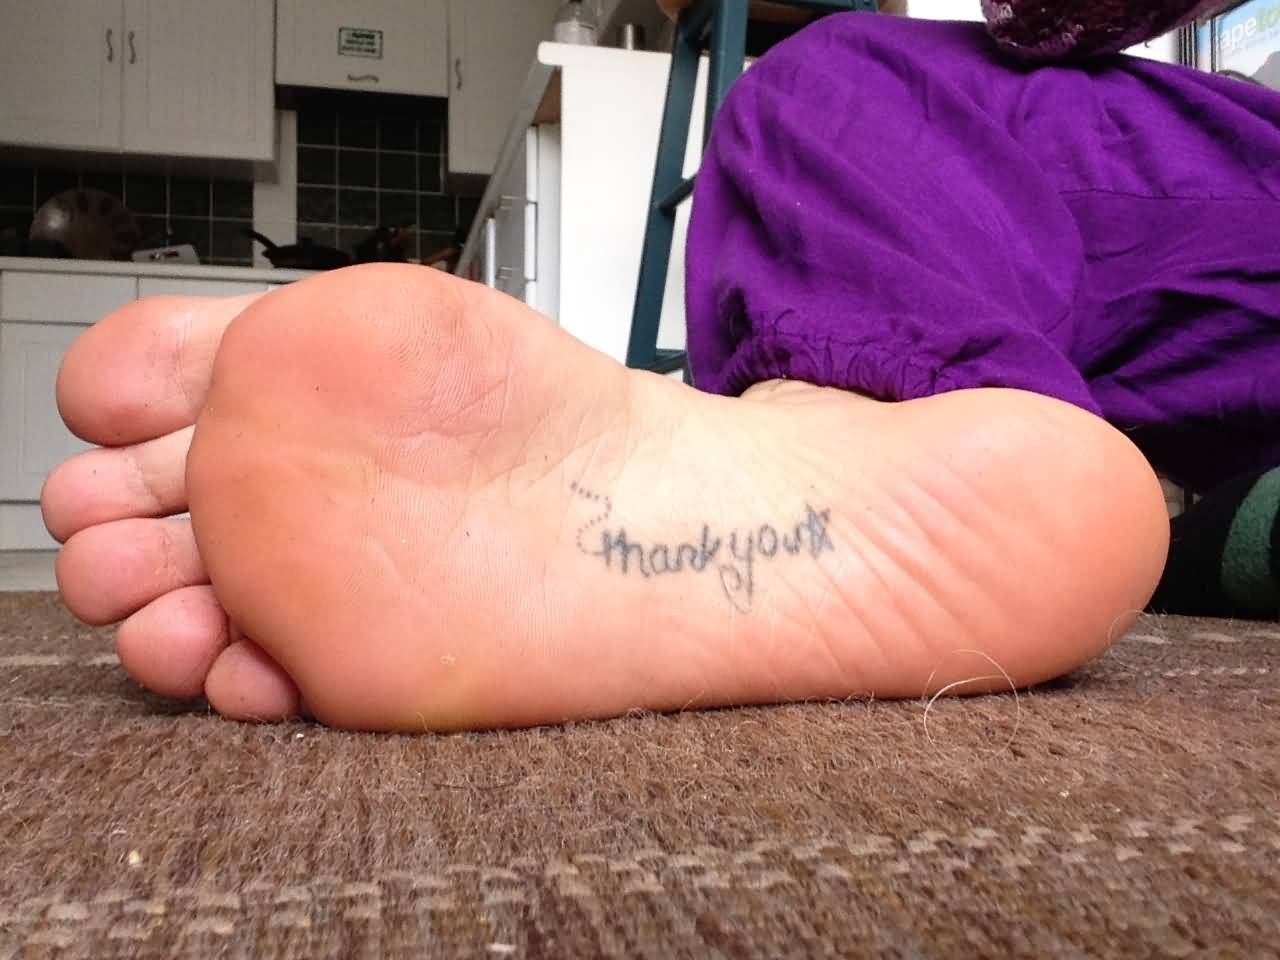 Thank You Sole Of Foot Tattoo